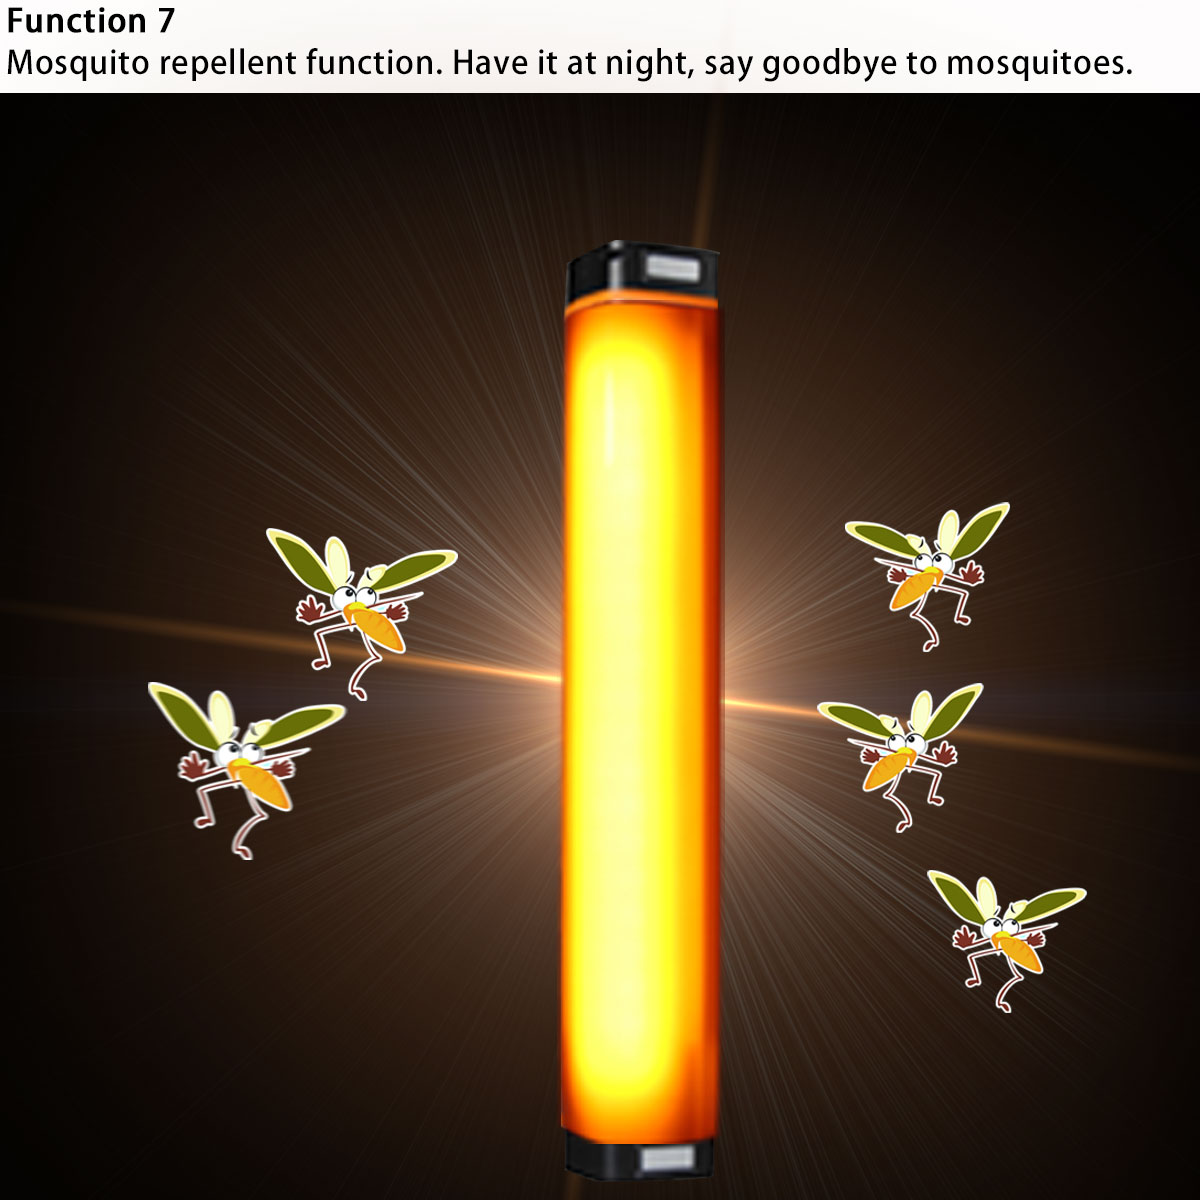 8-in-1-Camping-Light-Waterproof-Camping-Emergency-Light-Outdoor-Mosquito-Repellent-Lamp-Portable-Fla-1532096-8